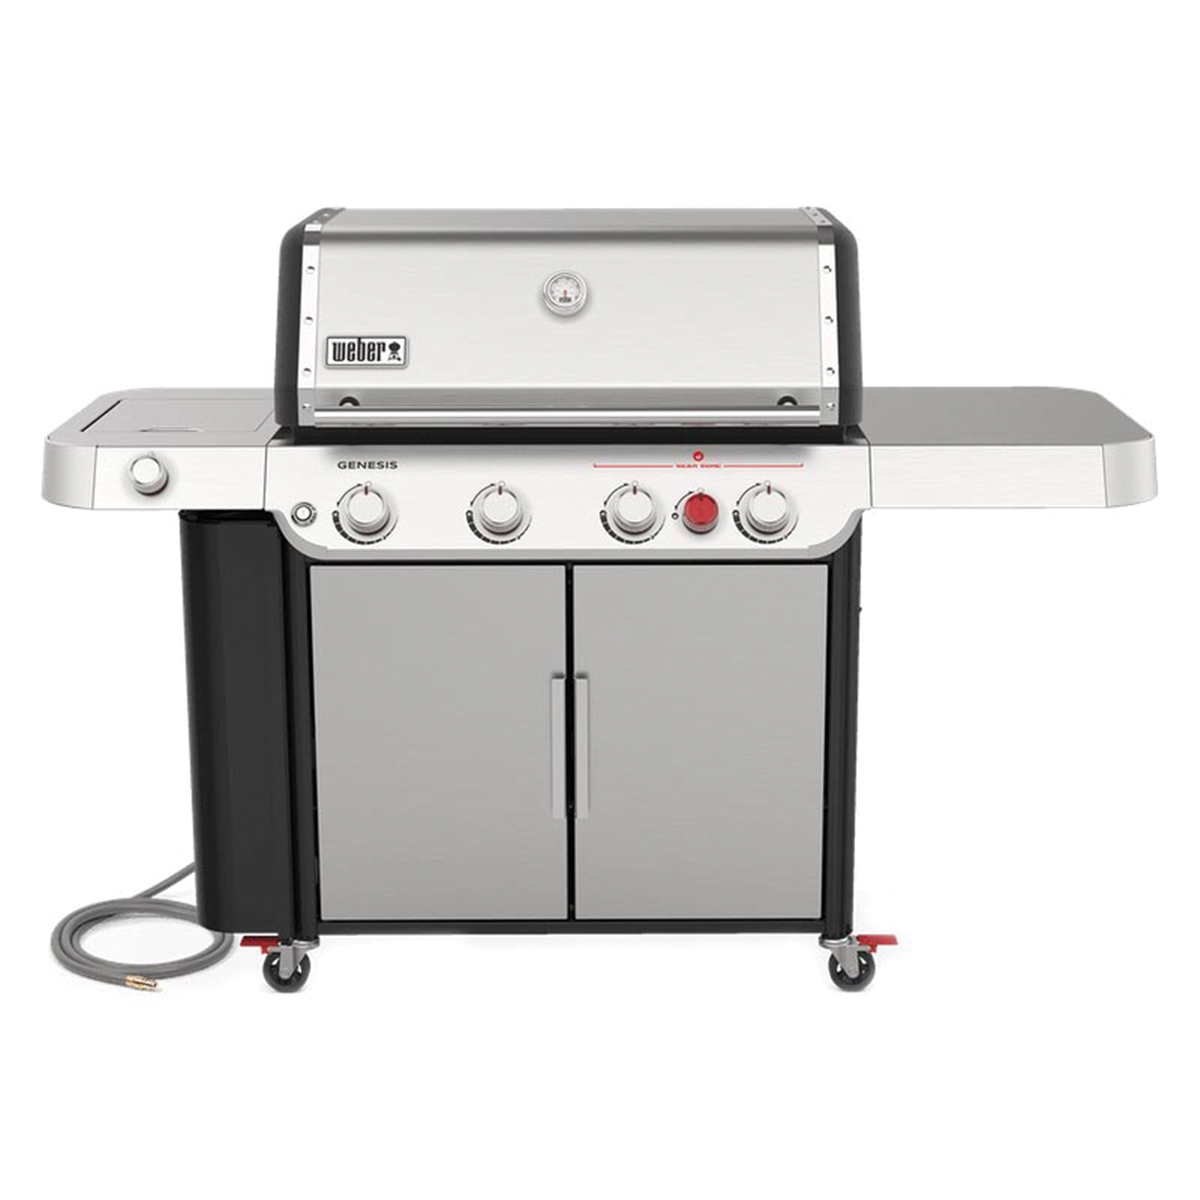 GENESIS S-435 Series 38400001 Gas Grill, 48,000 Btu, Natural Gas, 4-Burner, 646 sq-in Primary Cooking Surface